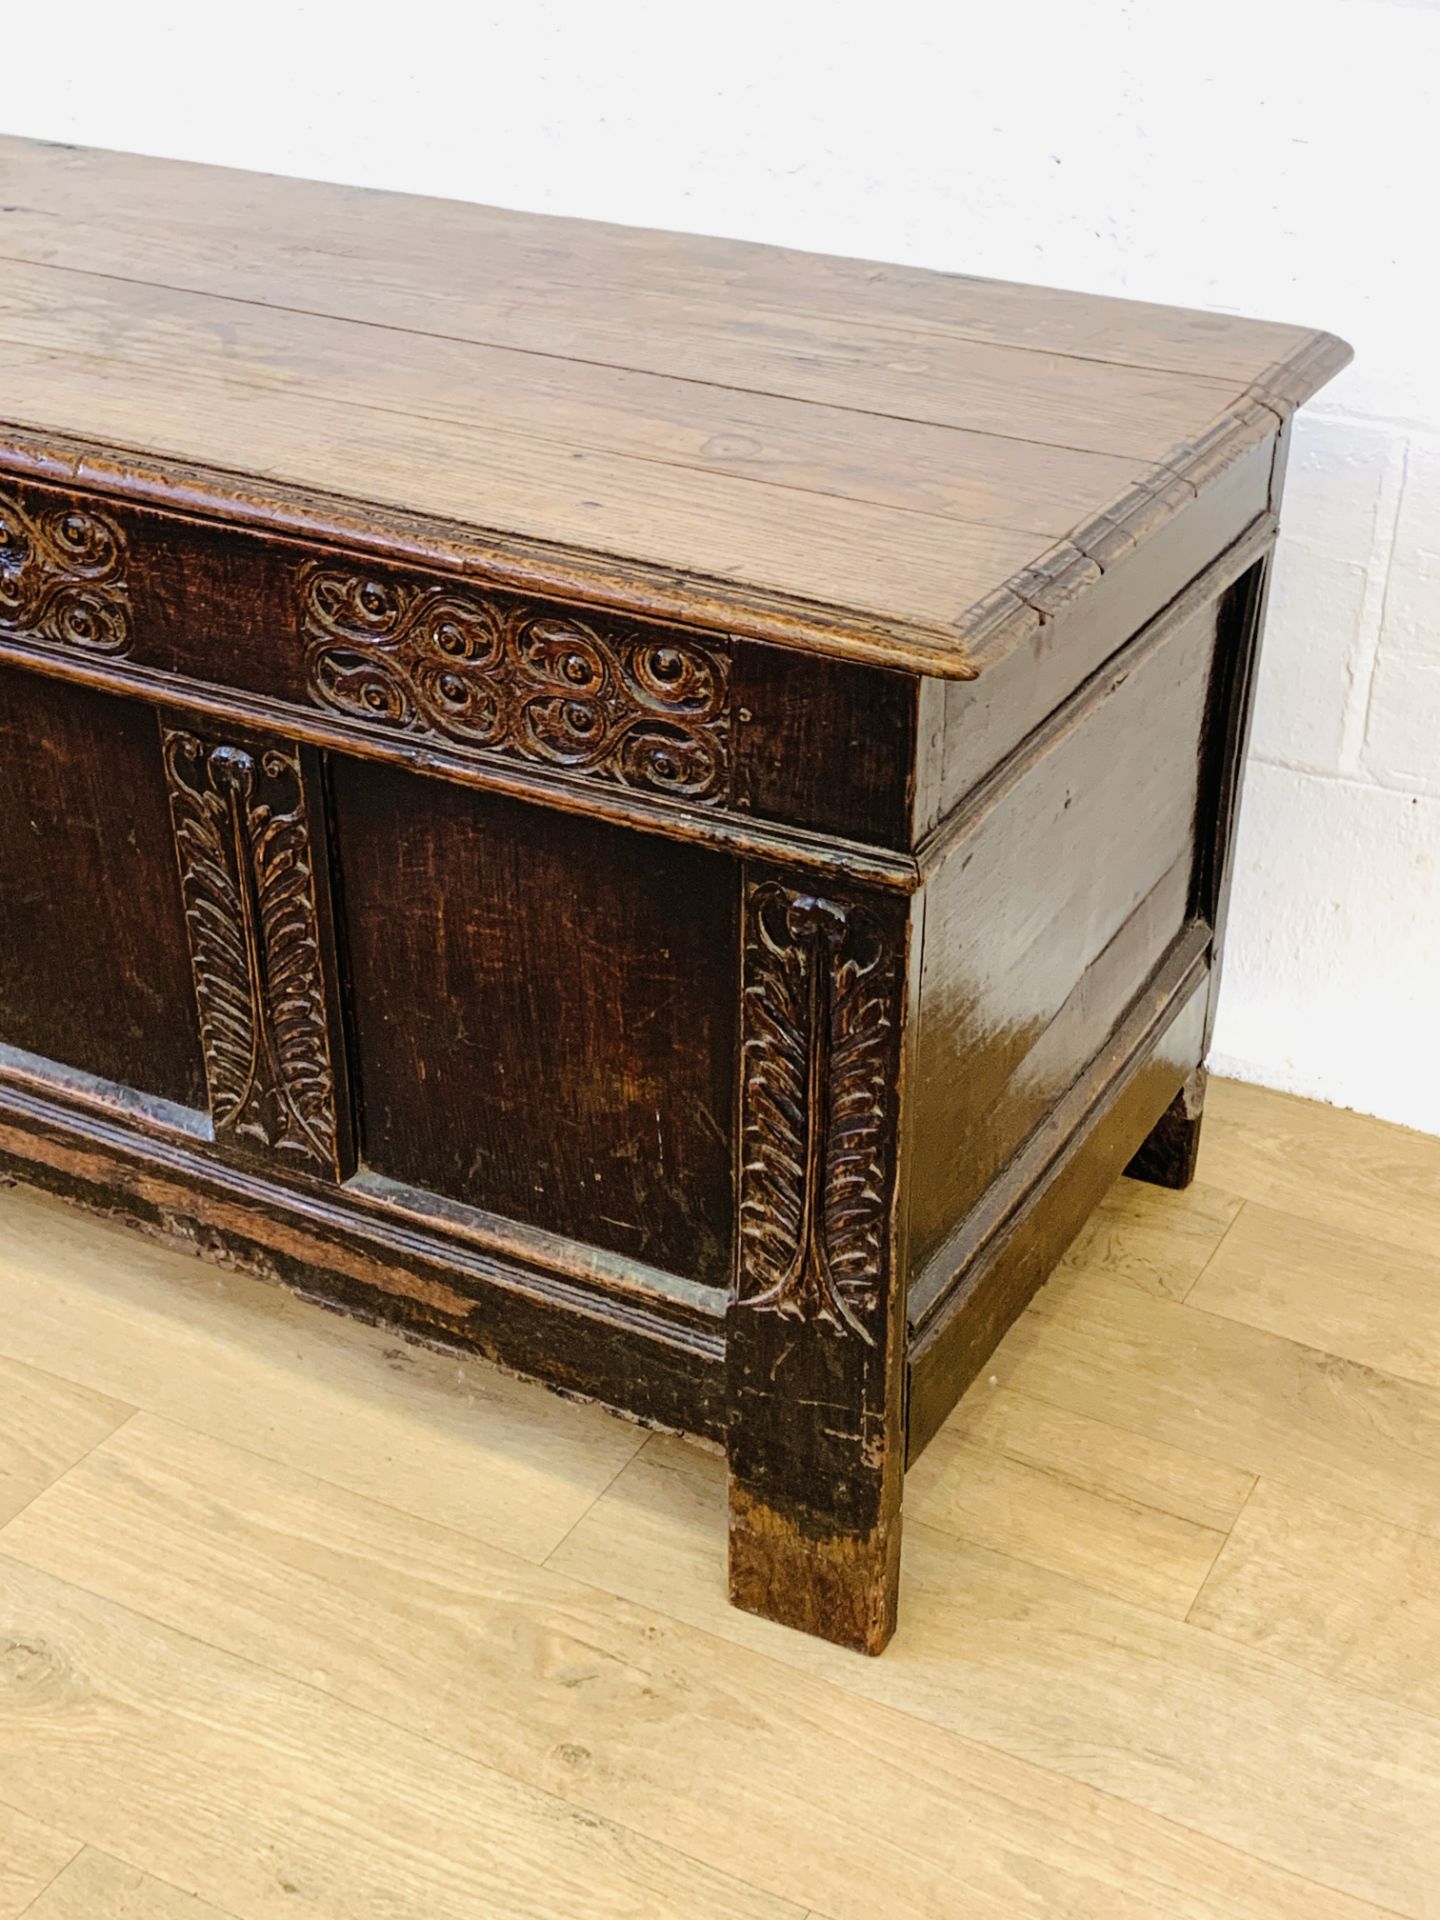 18th century oak chest with carved panel front - Image 4 of 6